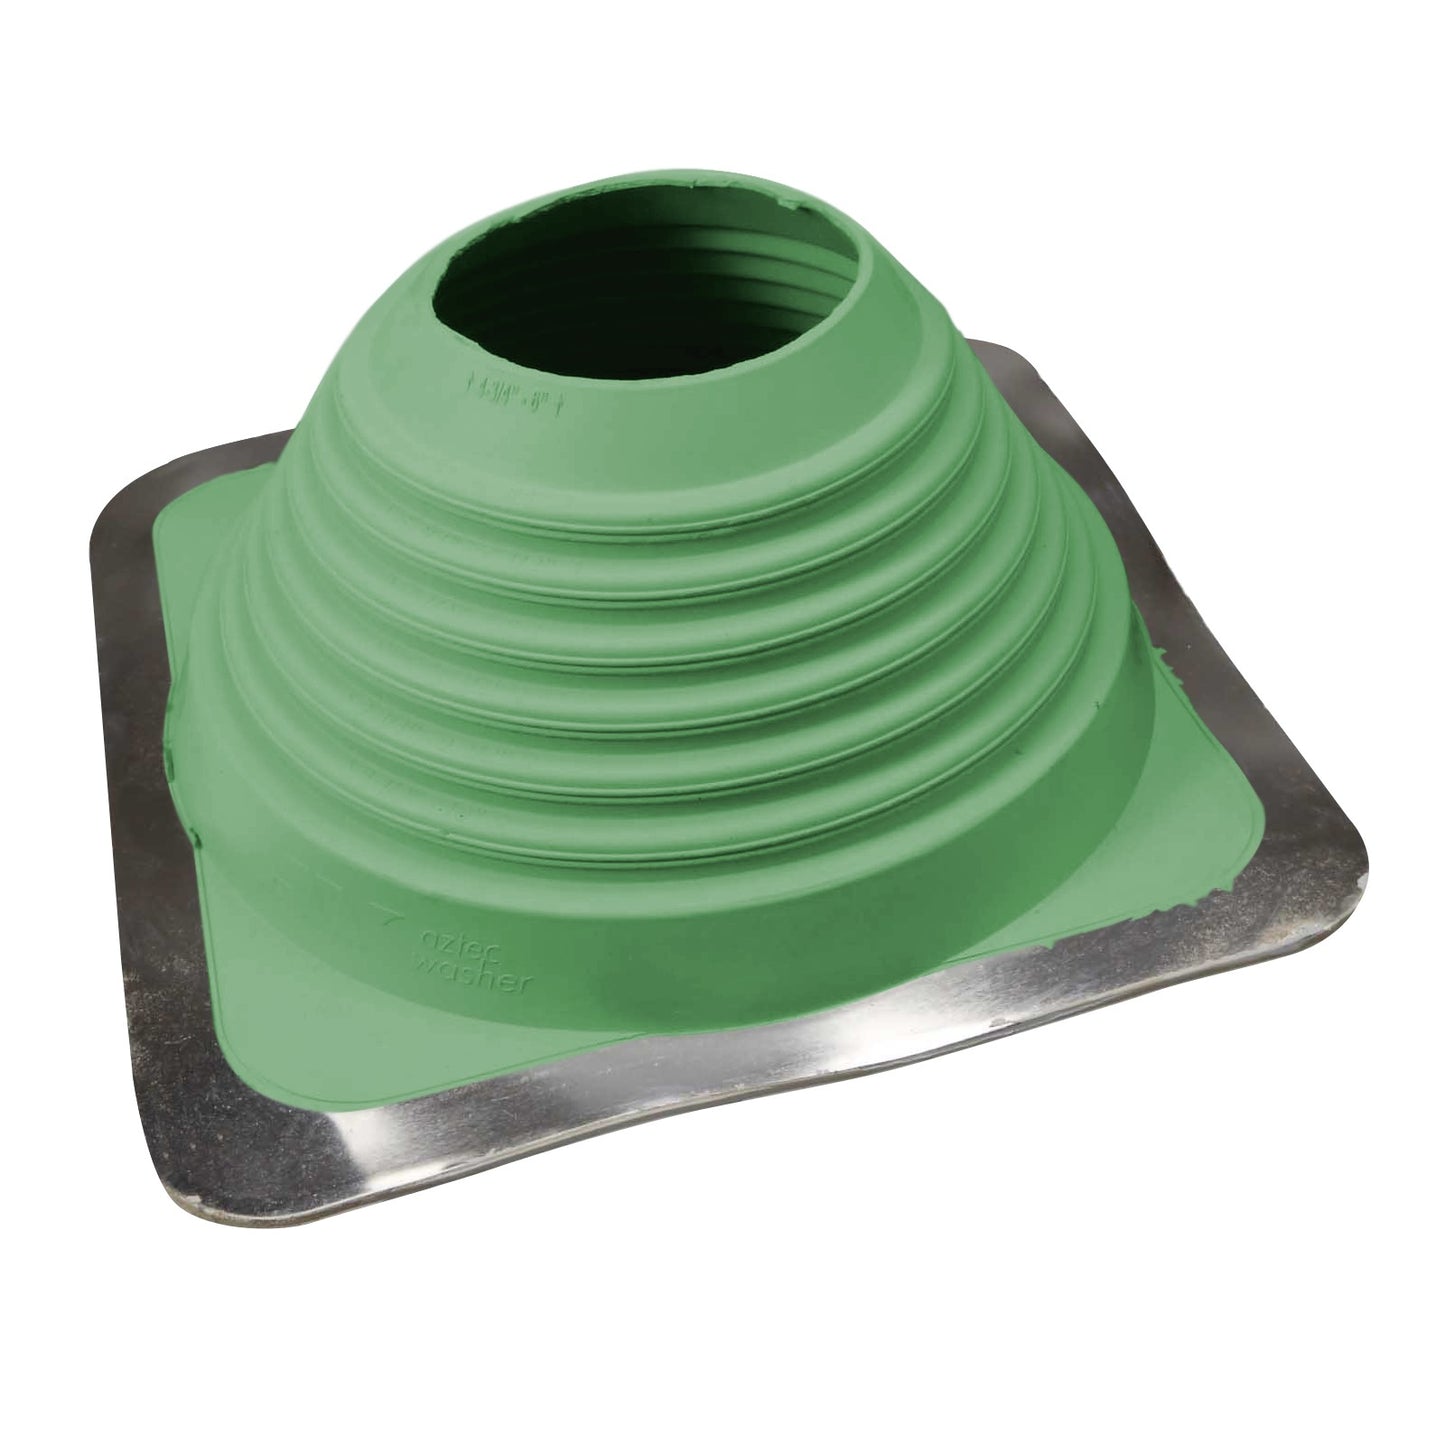 #6 Roofjack Square EPDM Pipe Flashing Boot Light Green